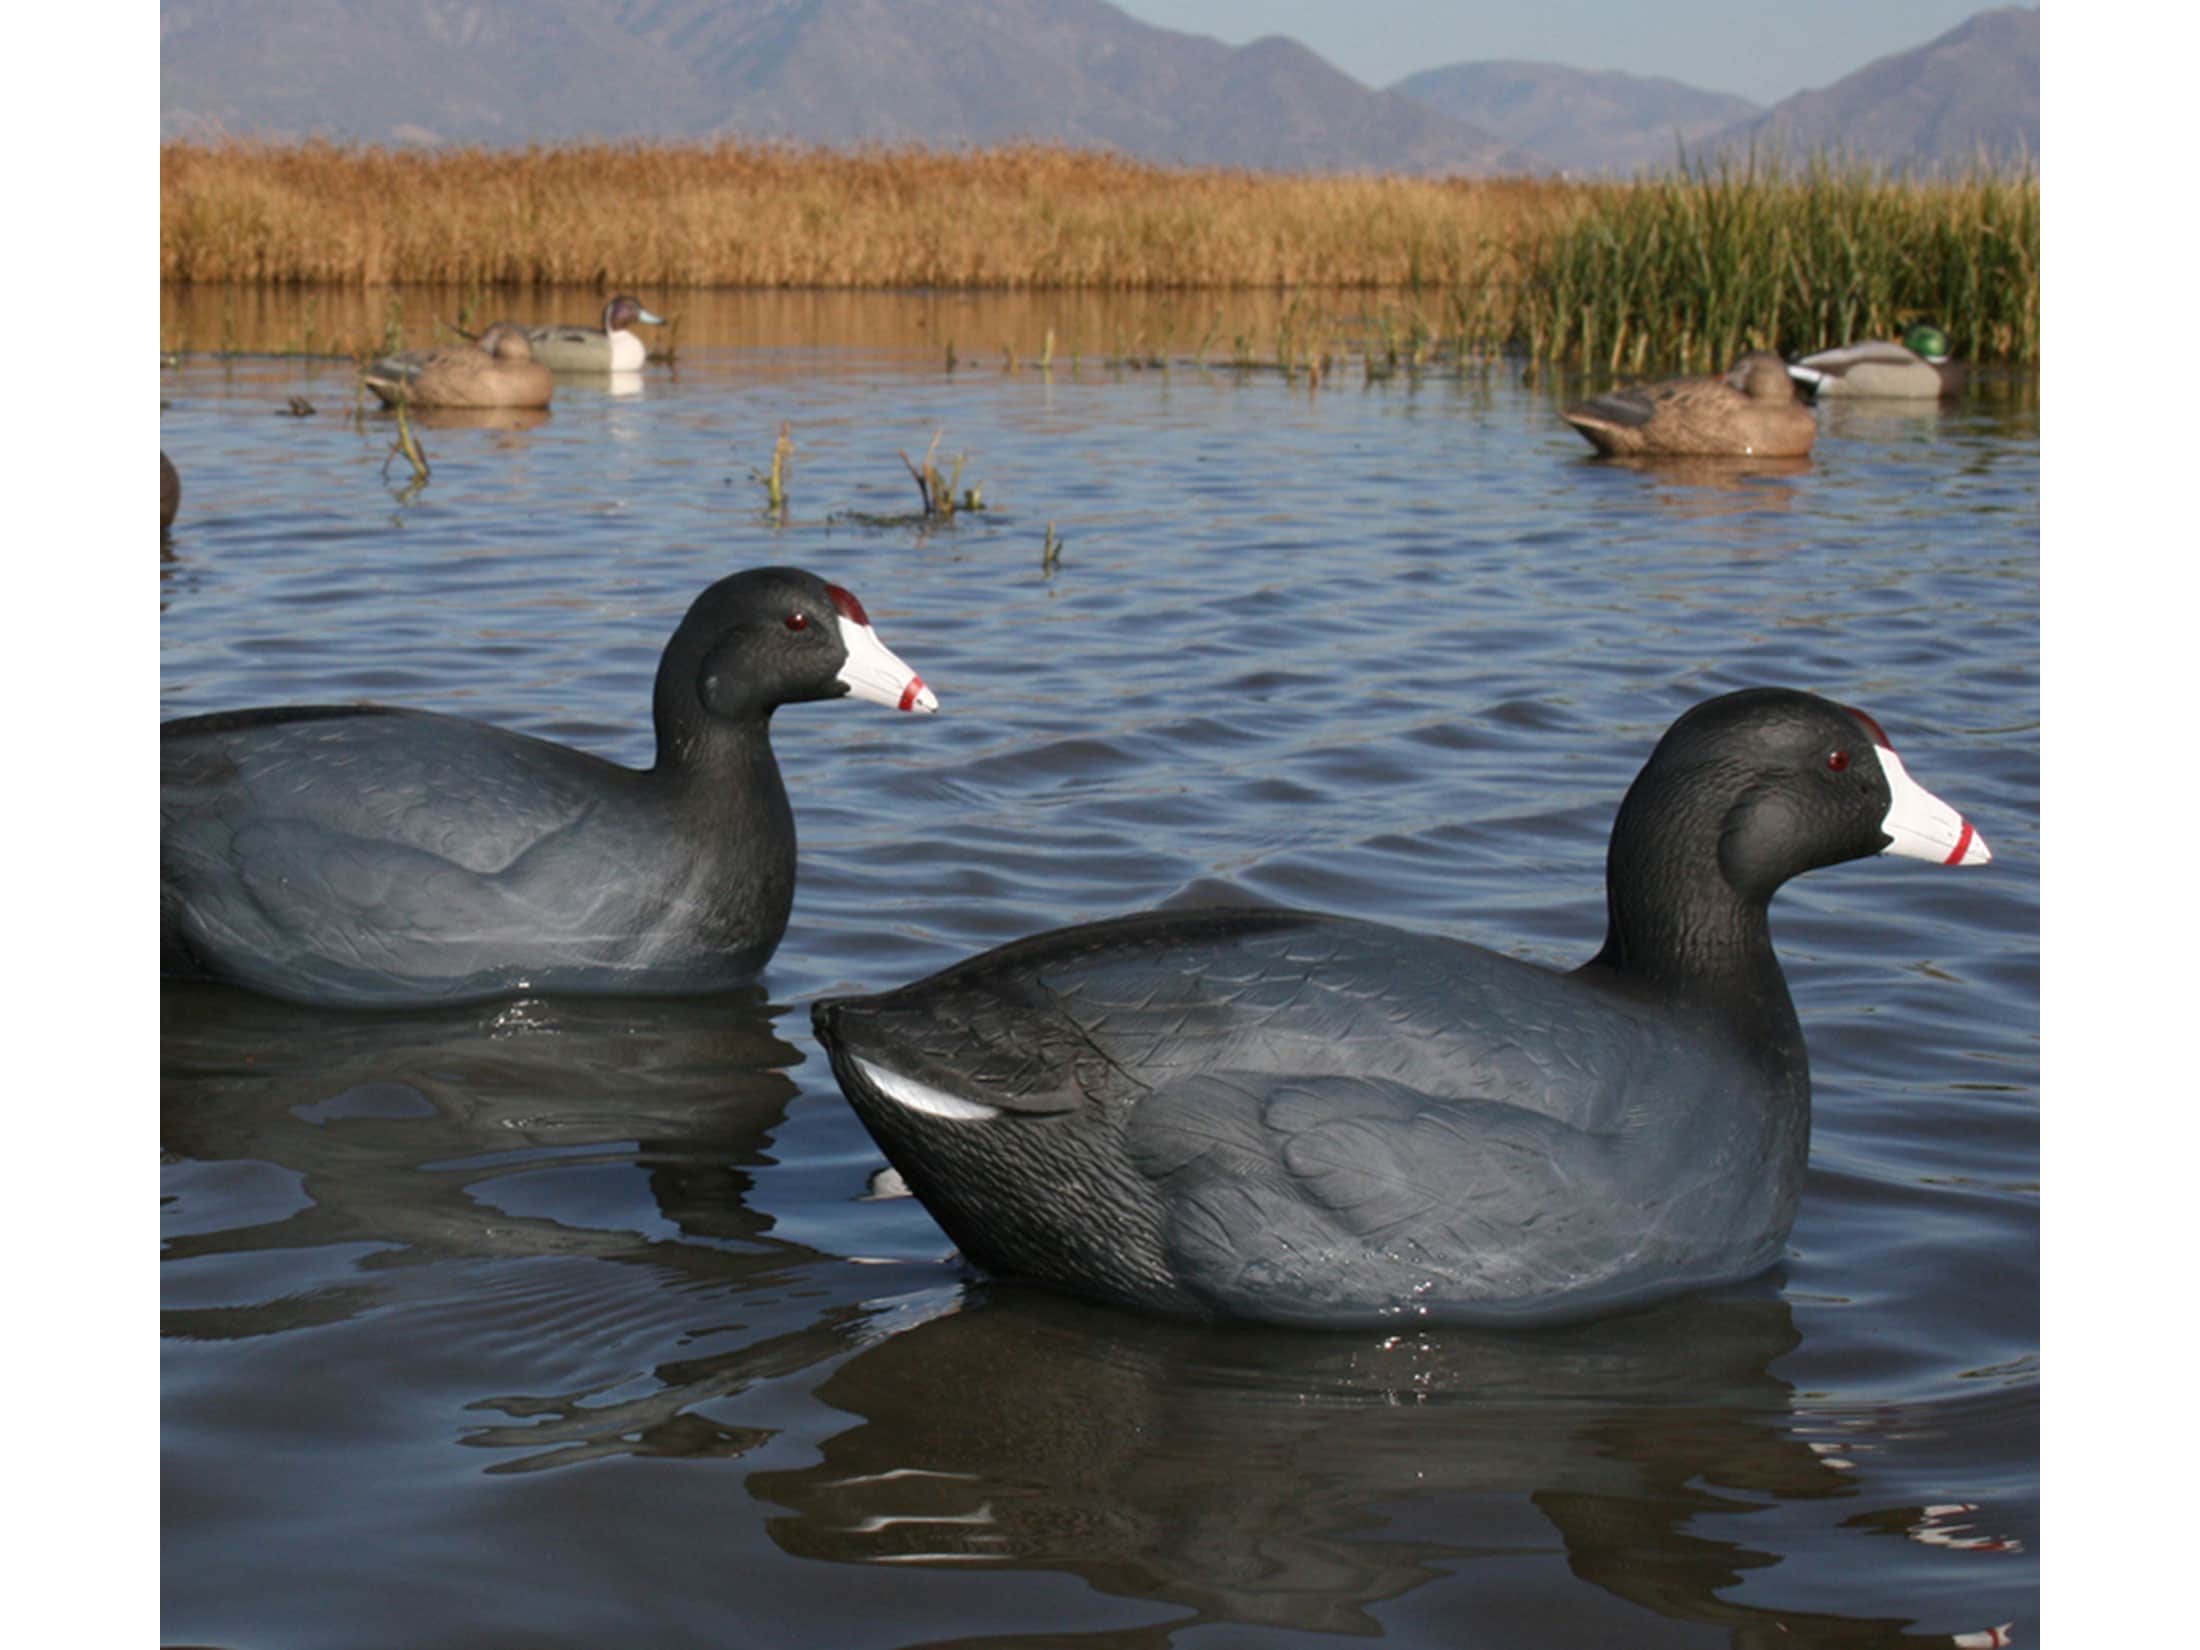 GHG Over-Size Coots Duck Decoy Pack of 6 For Sale